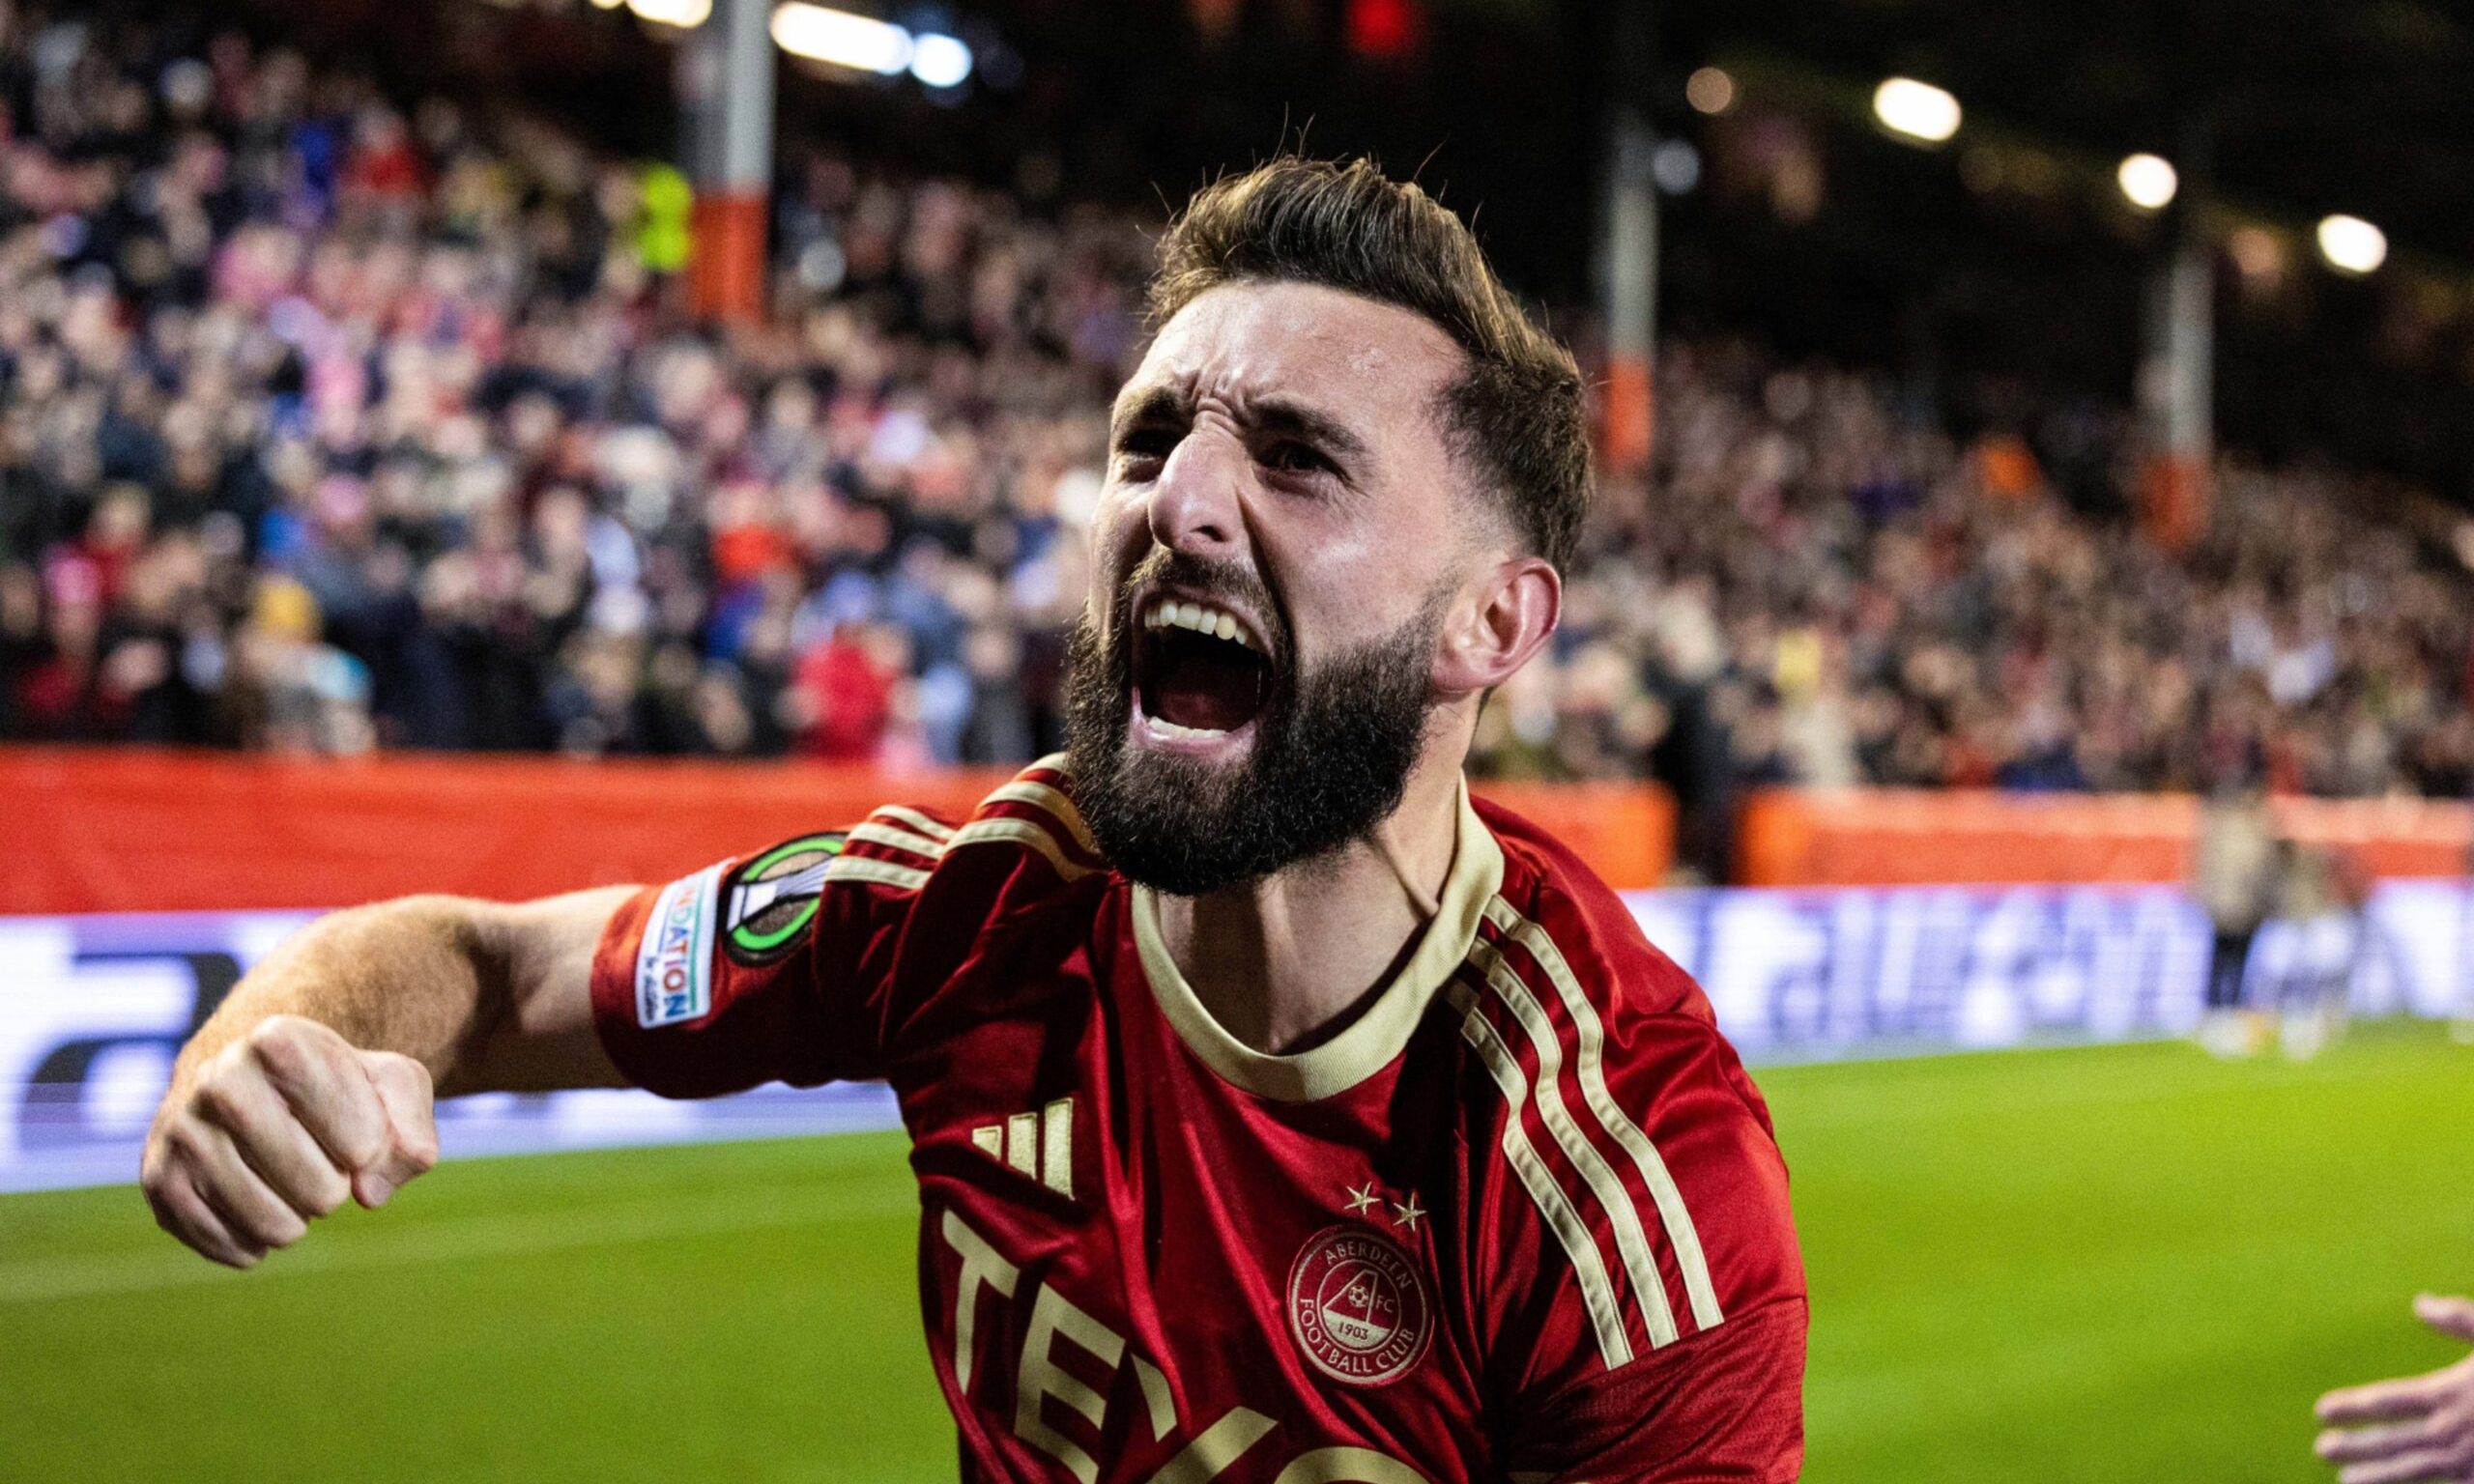 Captain Graeme Shinnie shouting in celebration on the pitch